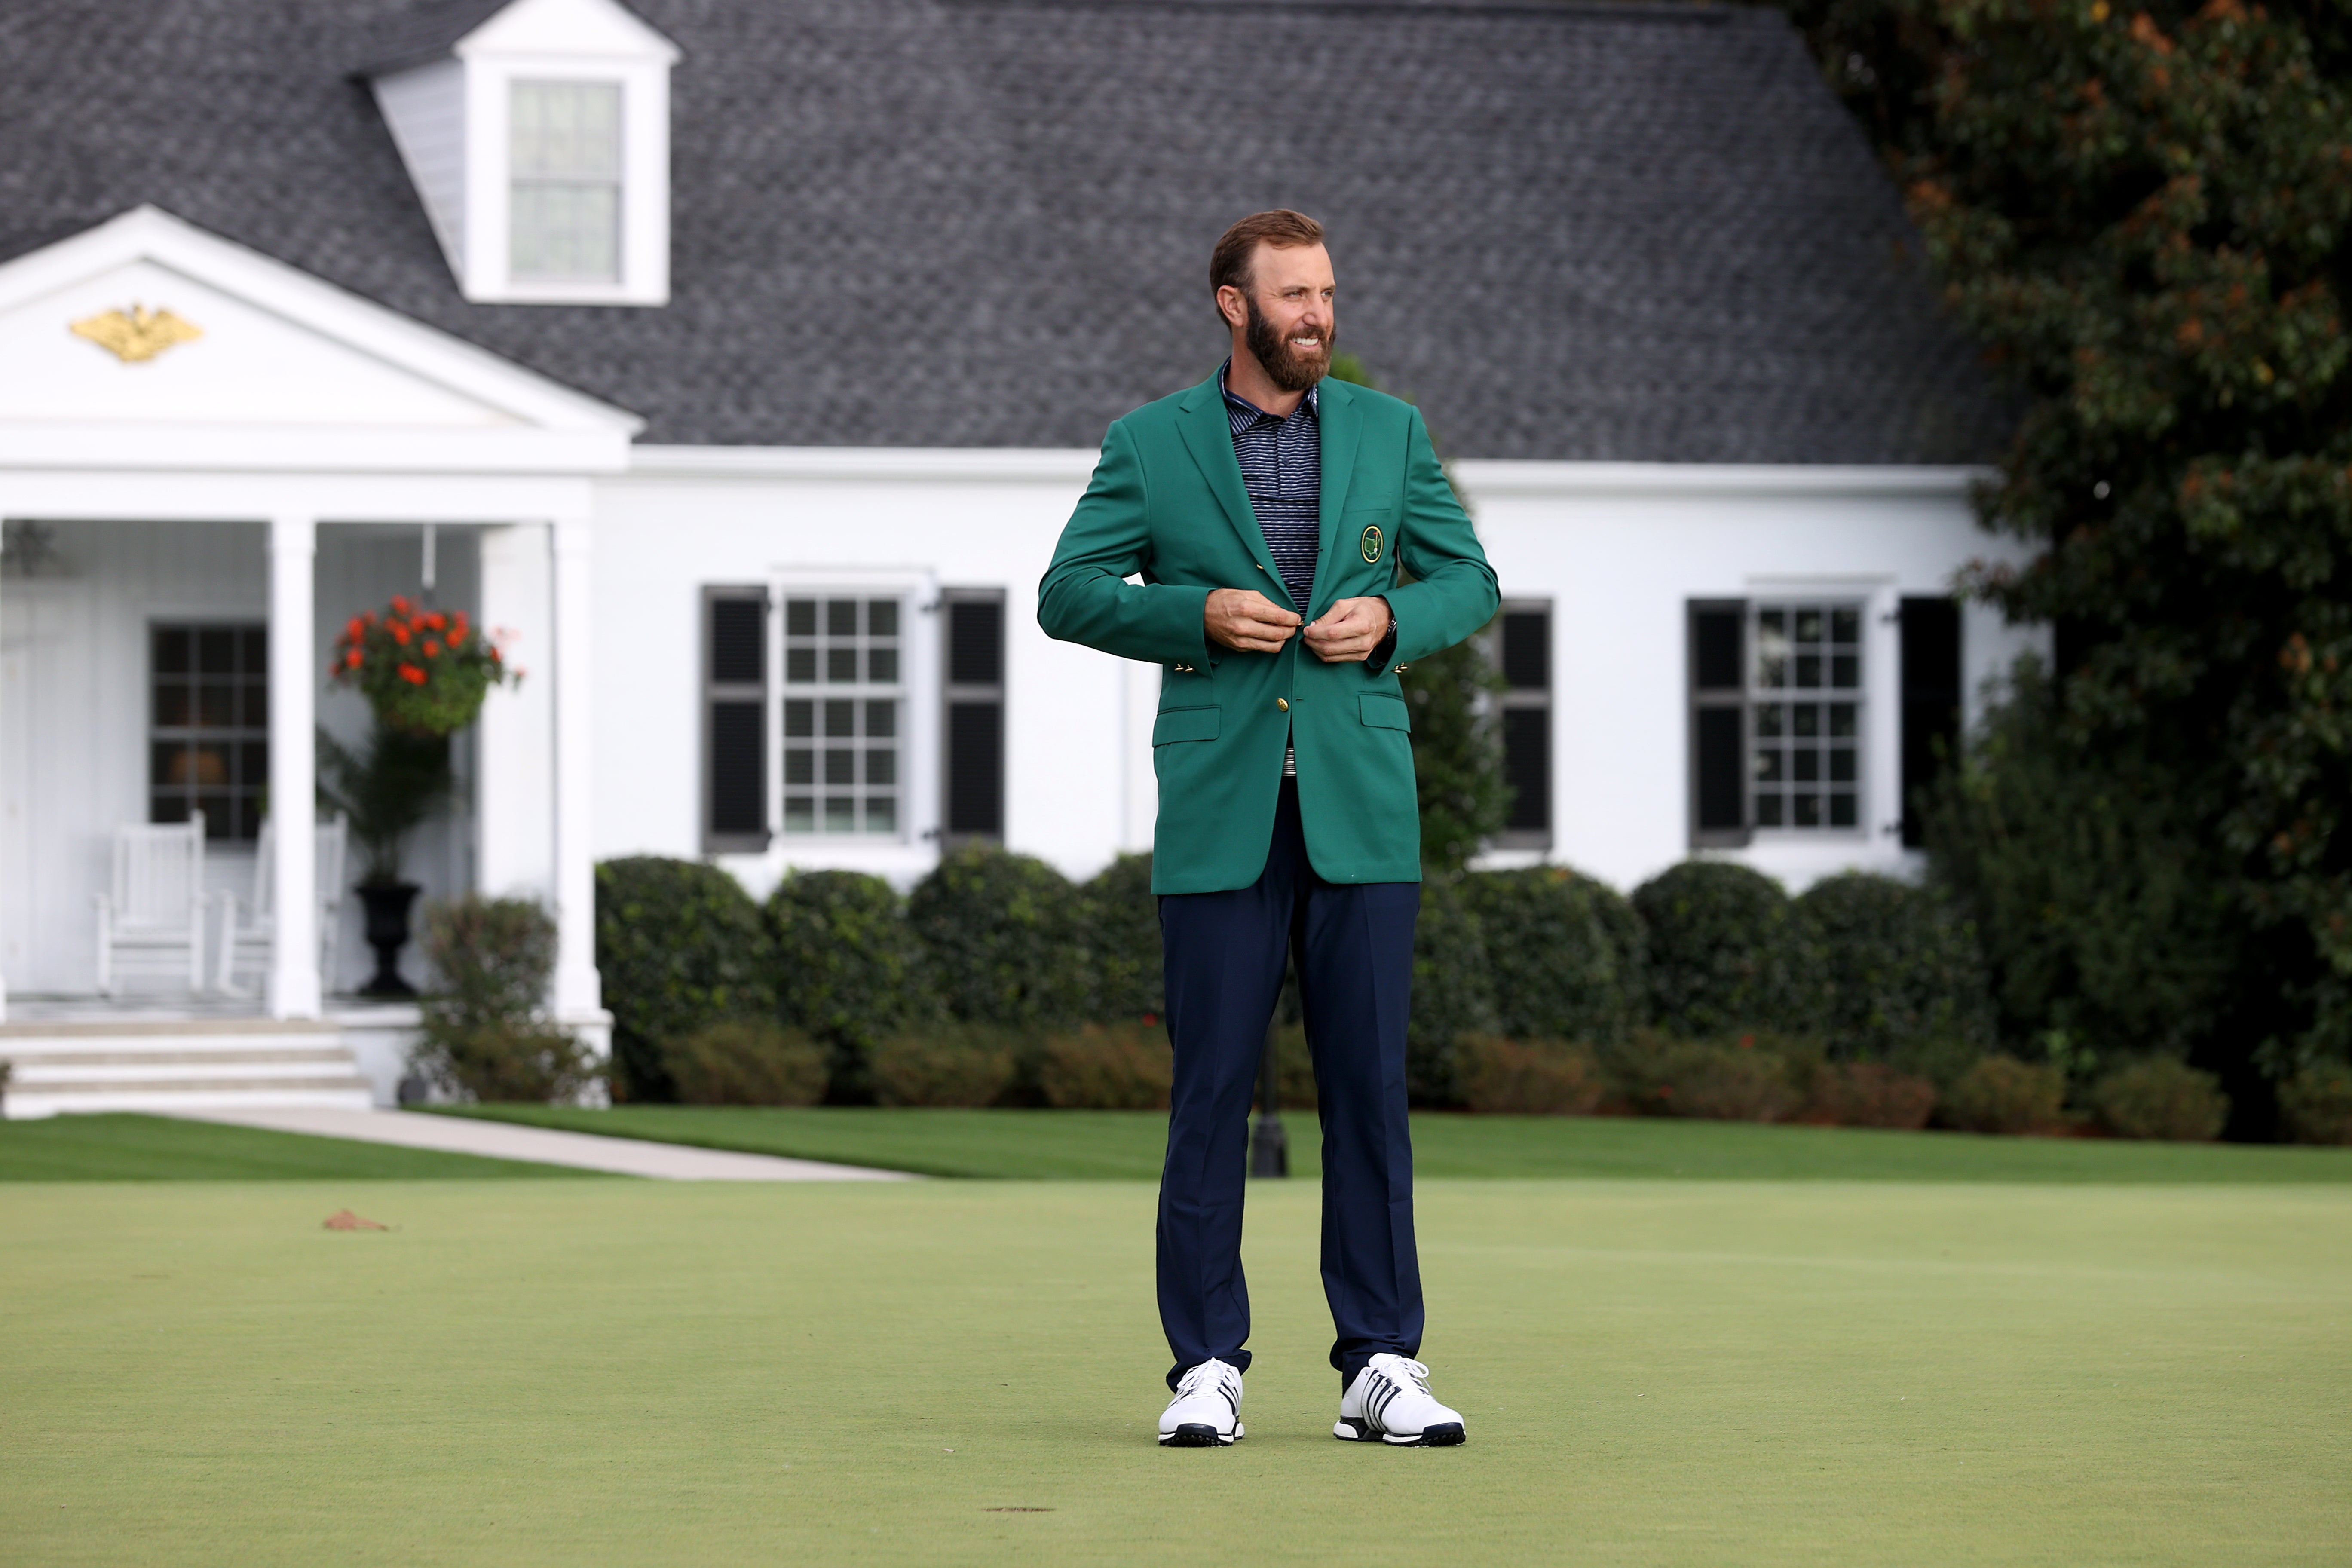 There is now a distinct possibility of a LIV Golf player slipping on the green jacket next year